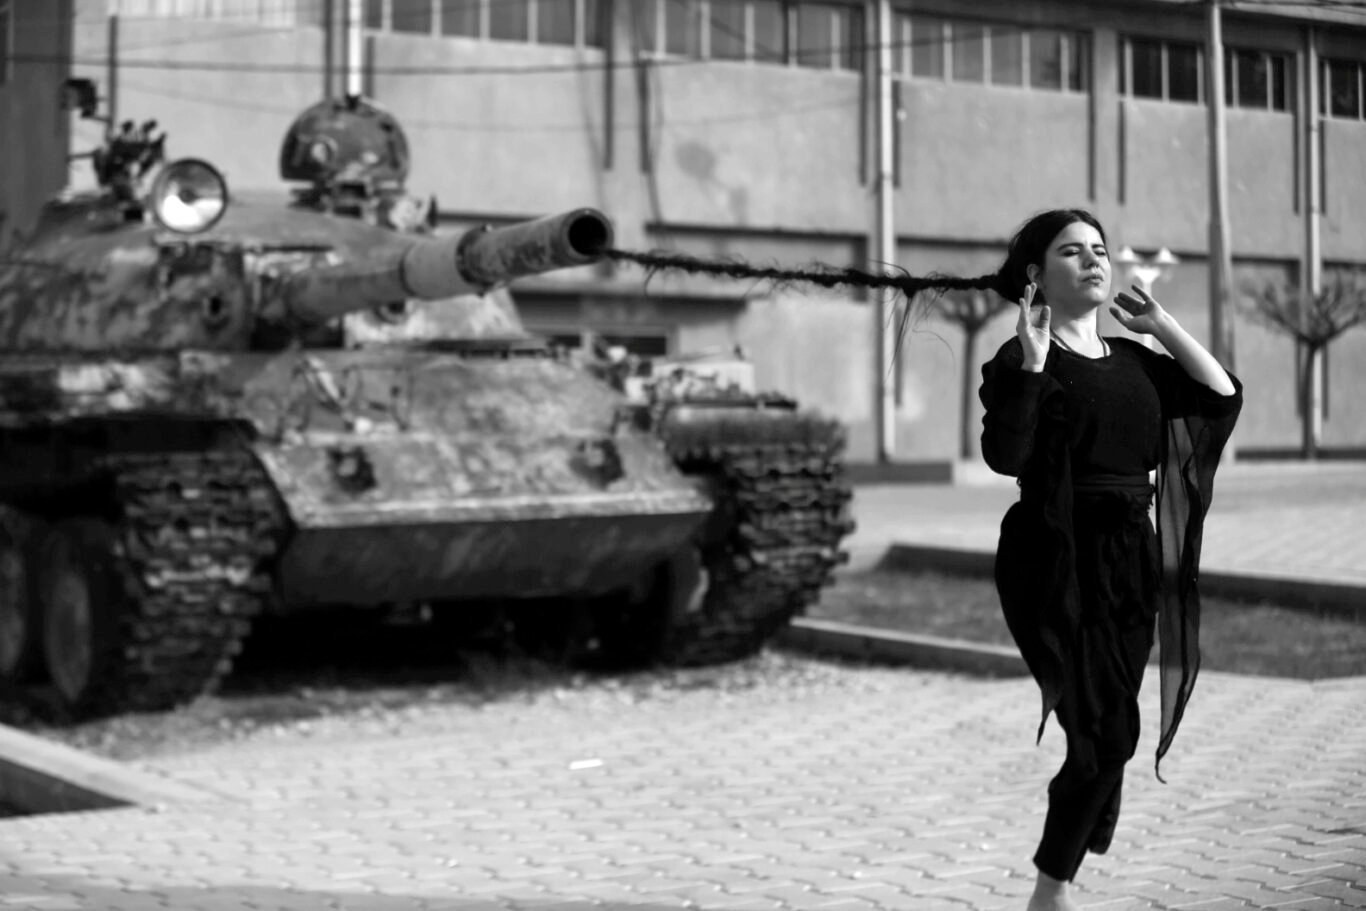 Artist Zehra Doğan performance, walking in front of a tank with her long hair coming out of the tank's cannon.